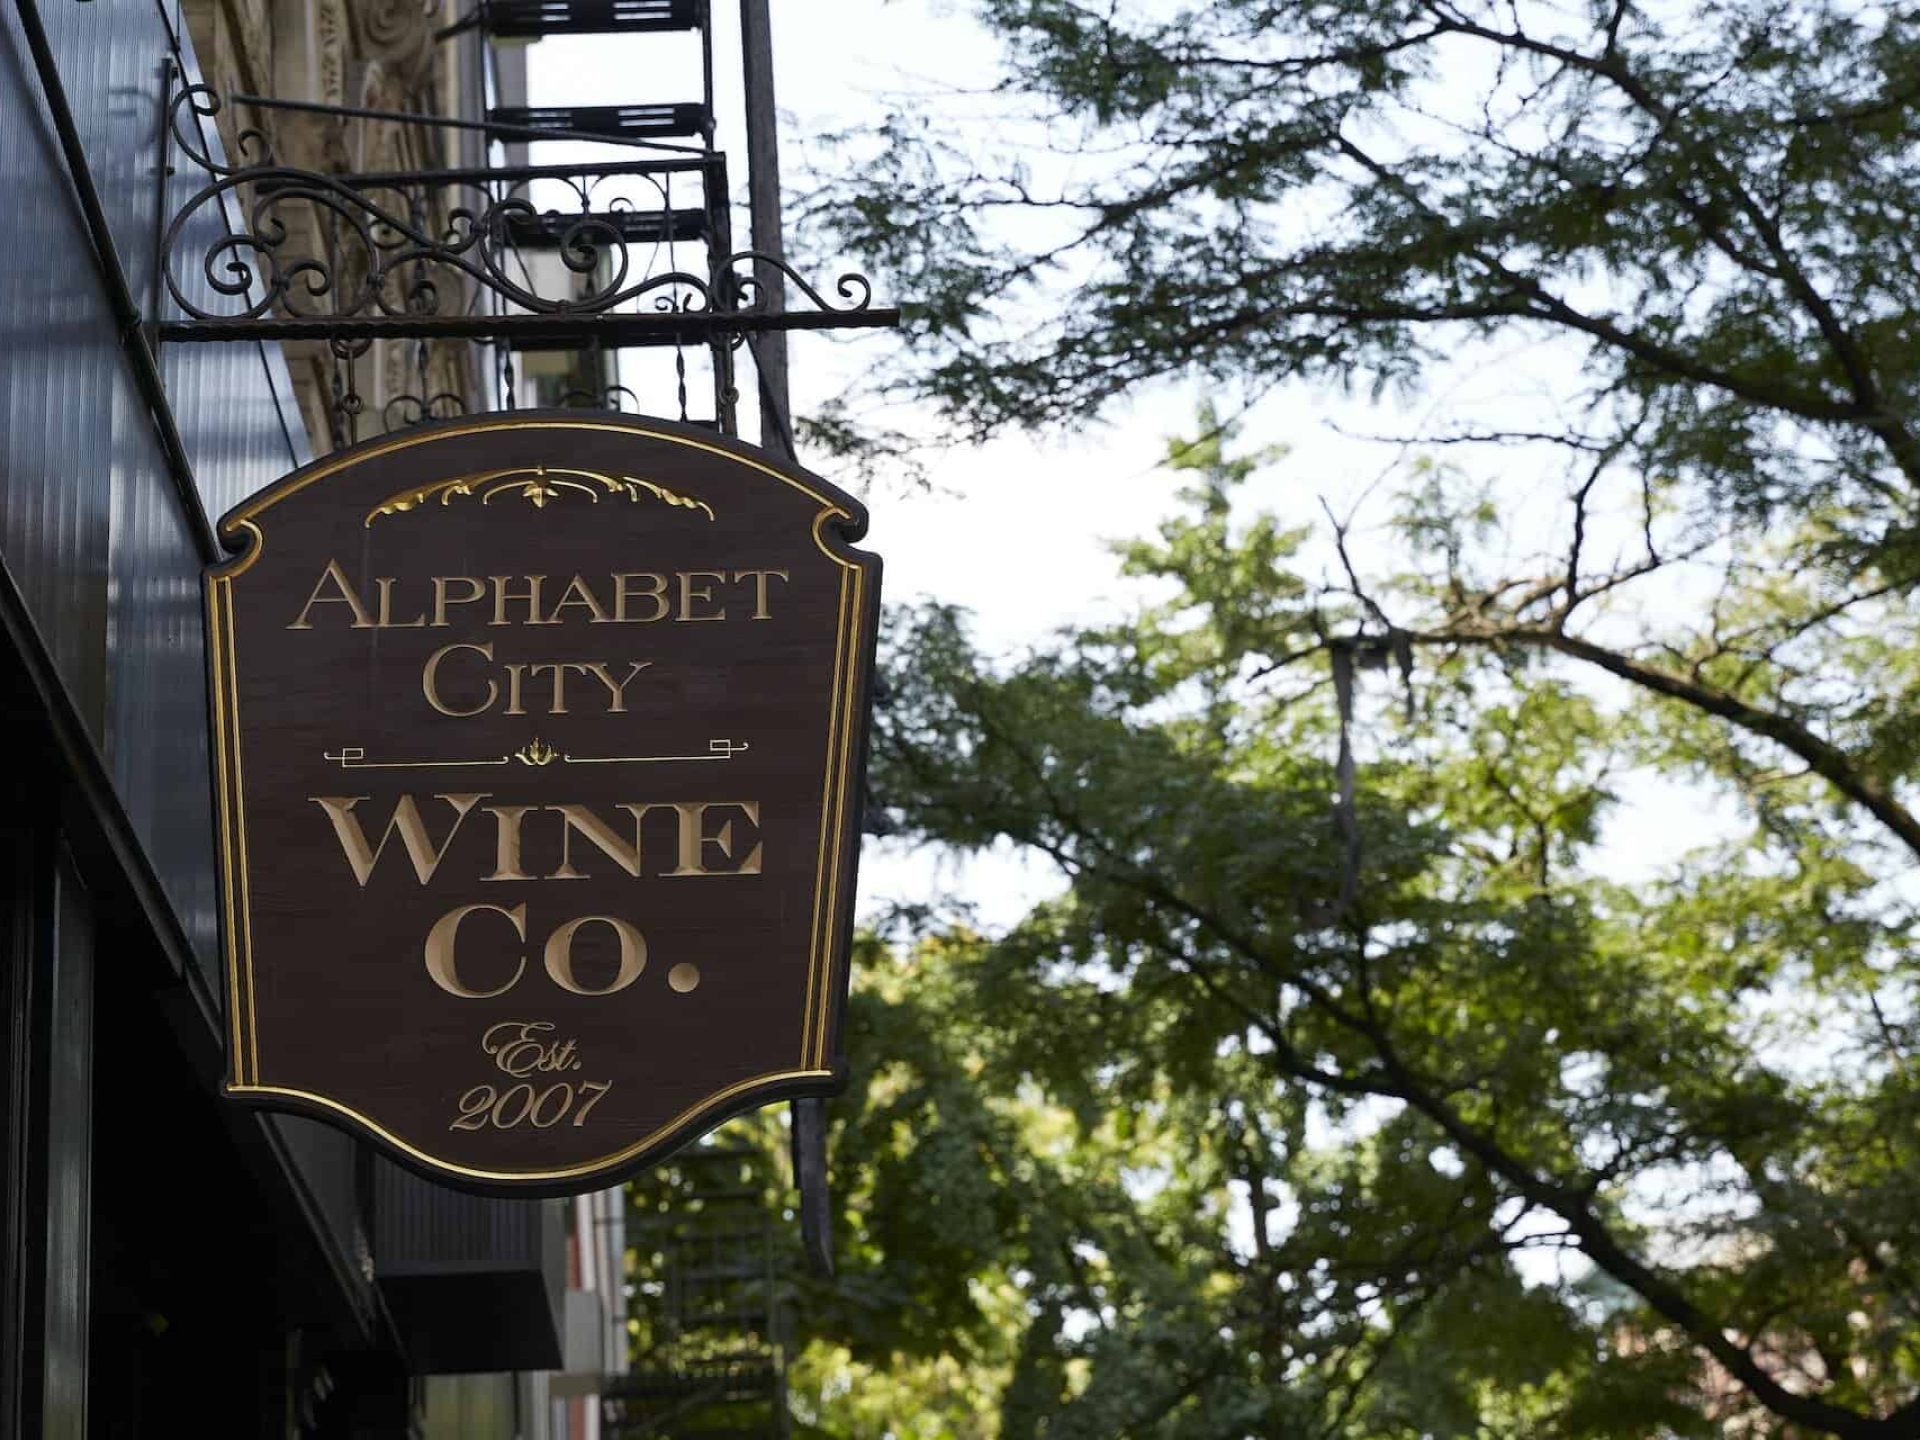 Close up of business sign for Alphabet City Wine Co. A brown sign with gold trim and lettering hanging above the entrance.